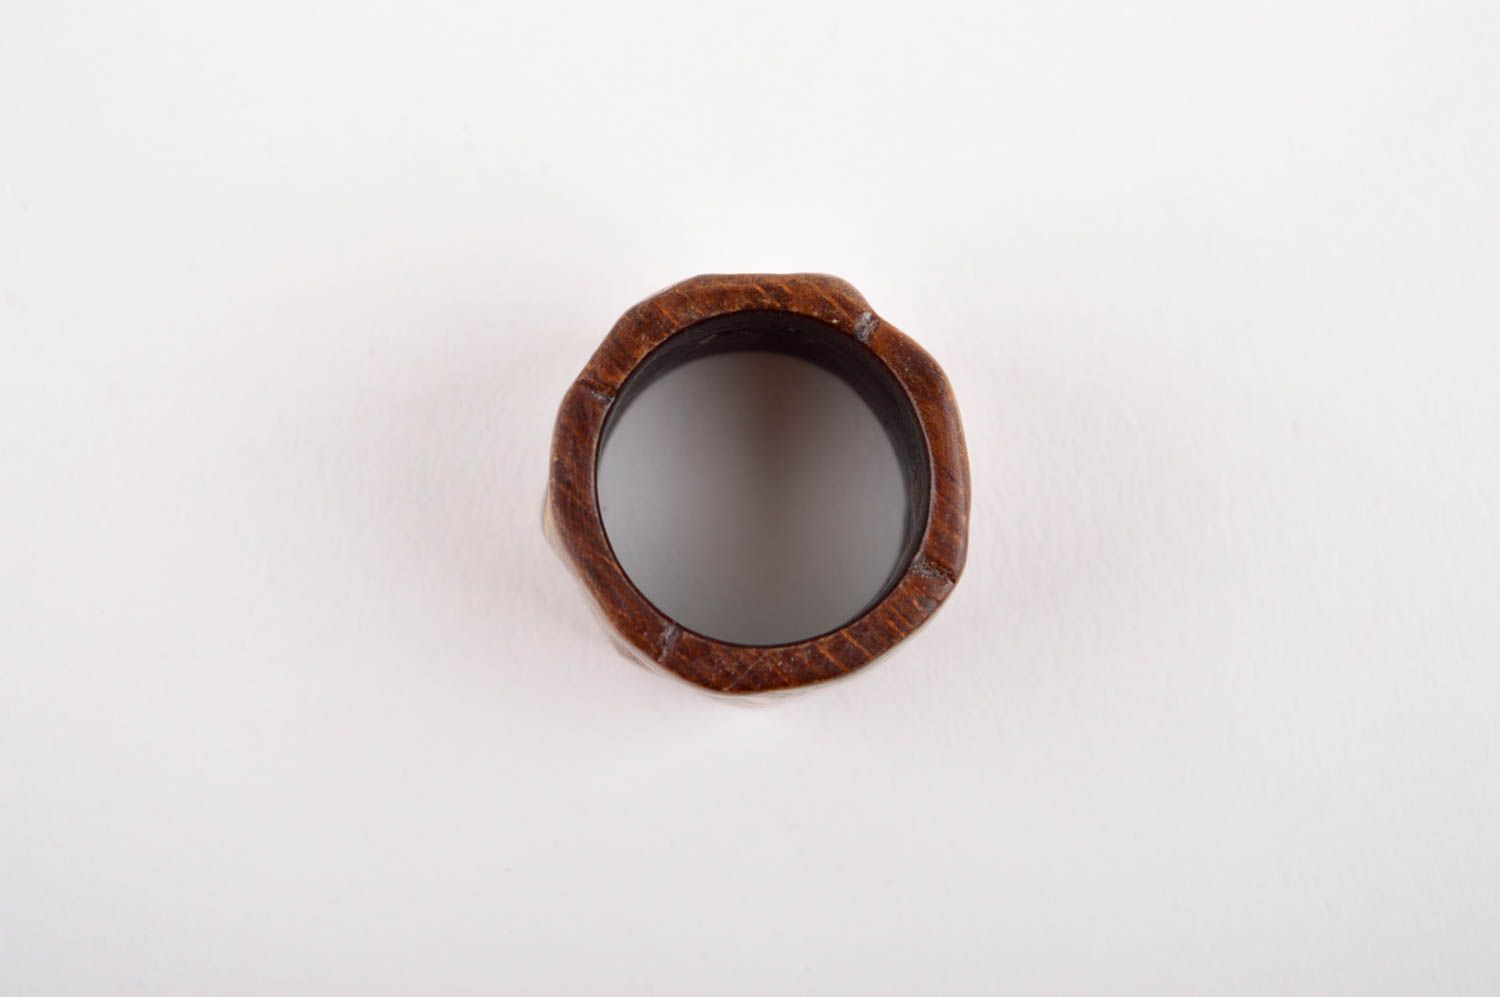 Stylish handmade wooden ring wood craft artisan jewelry designs gifts for her photo 4